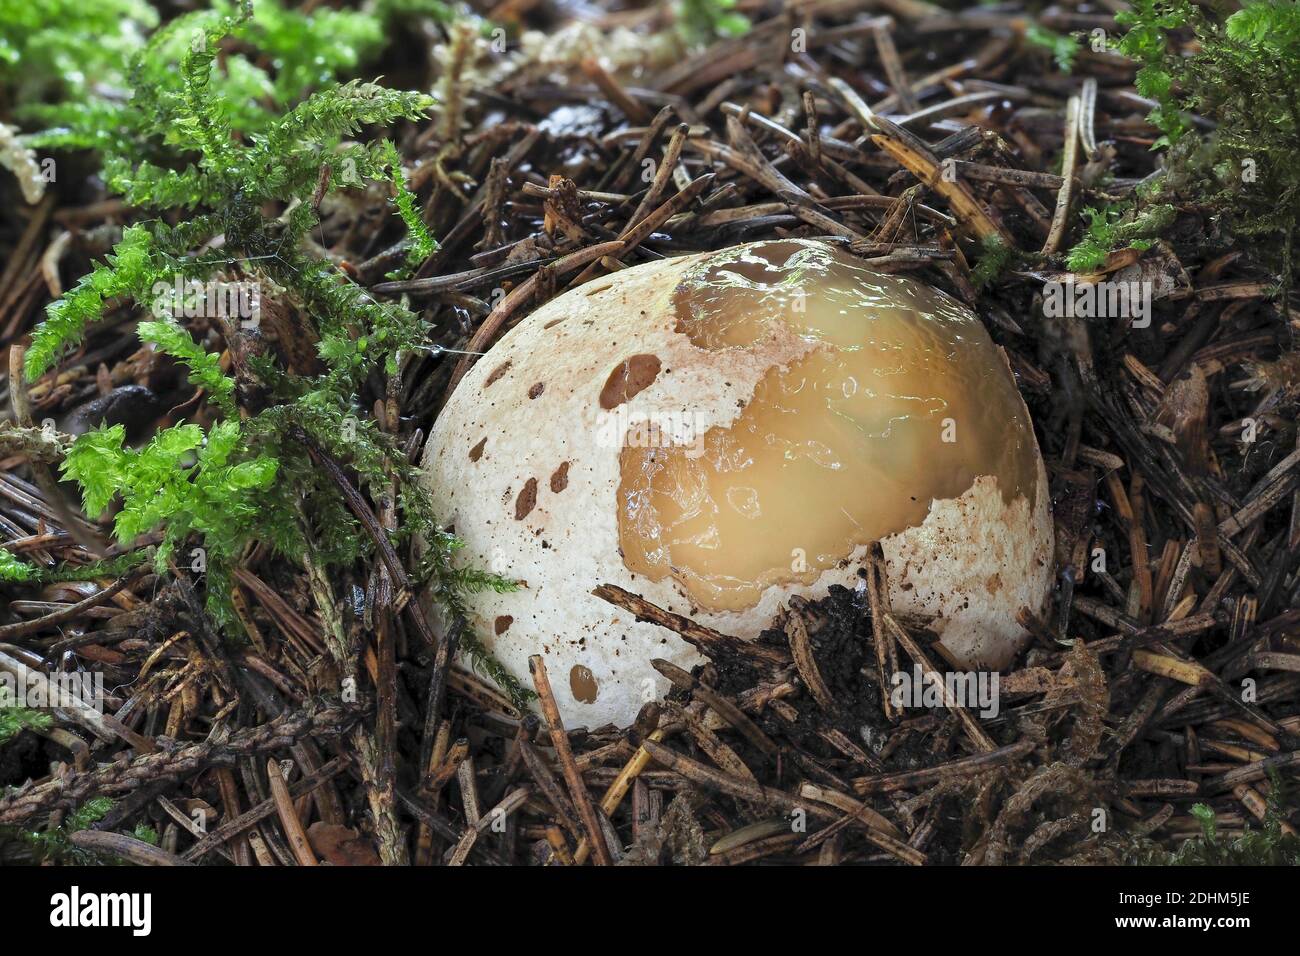 The Stinkhorn (Phallus impudicus) is a jung edible mushroom , stacked macro photo Stock Photo